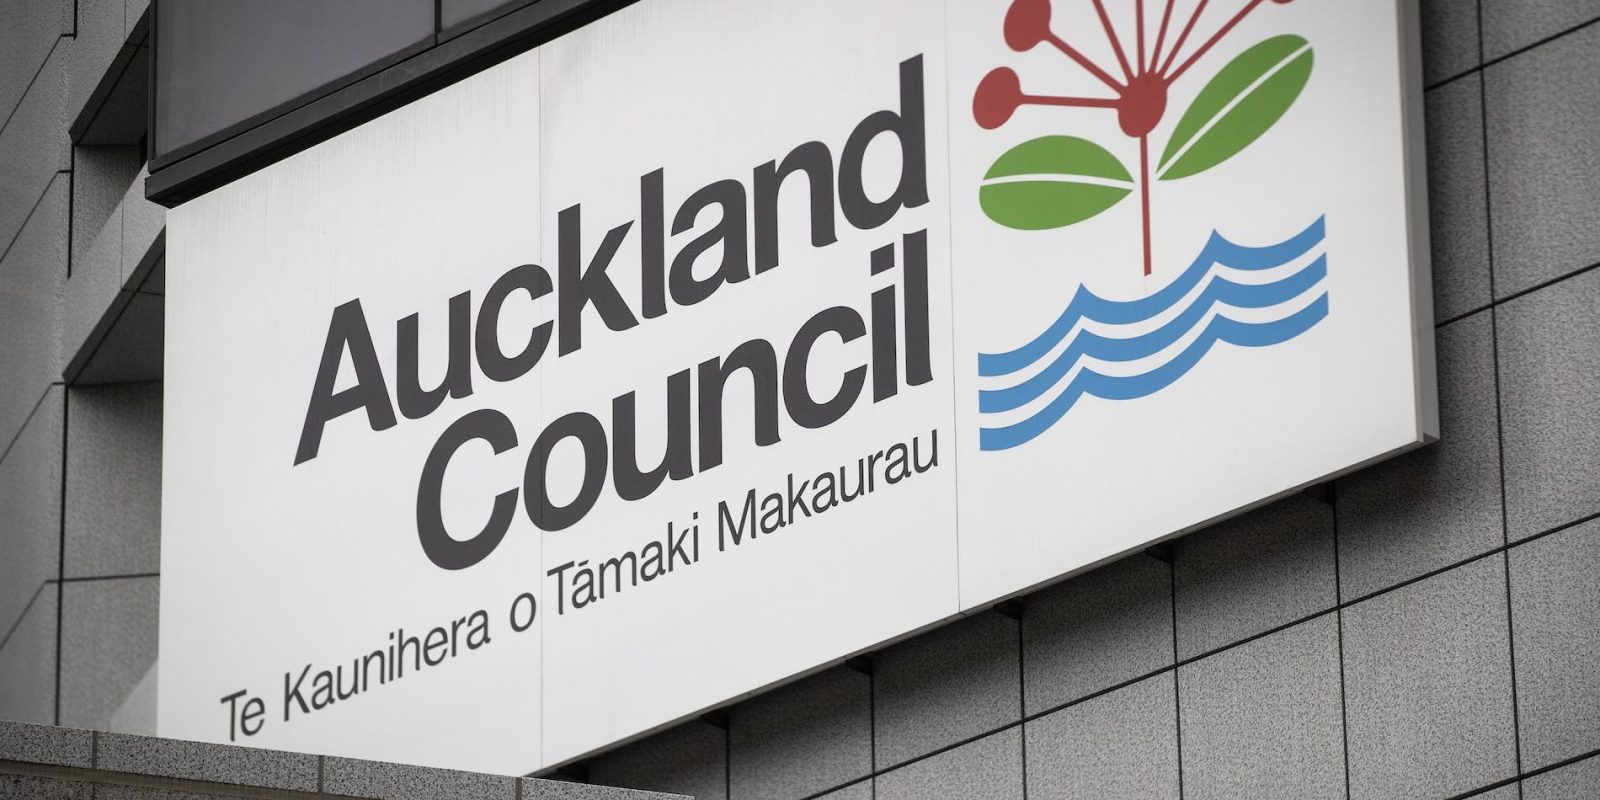 Decisions from a Distance: Auckland Council Headquarters, 90 Kilometers Away from Aotea. Photo / NZME